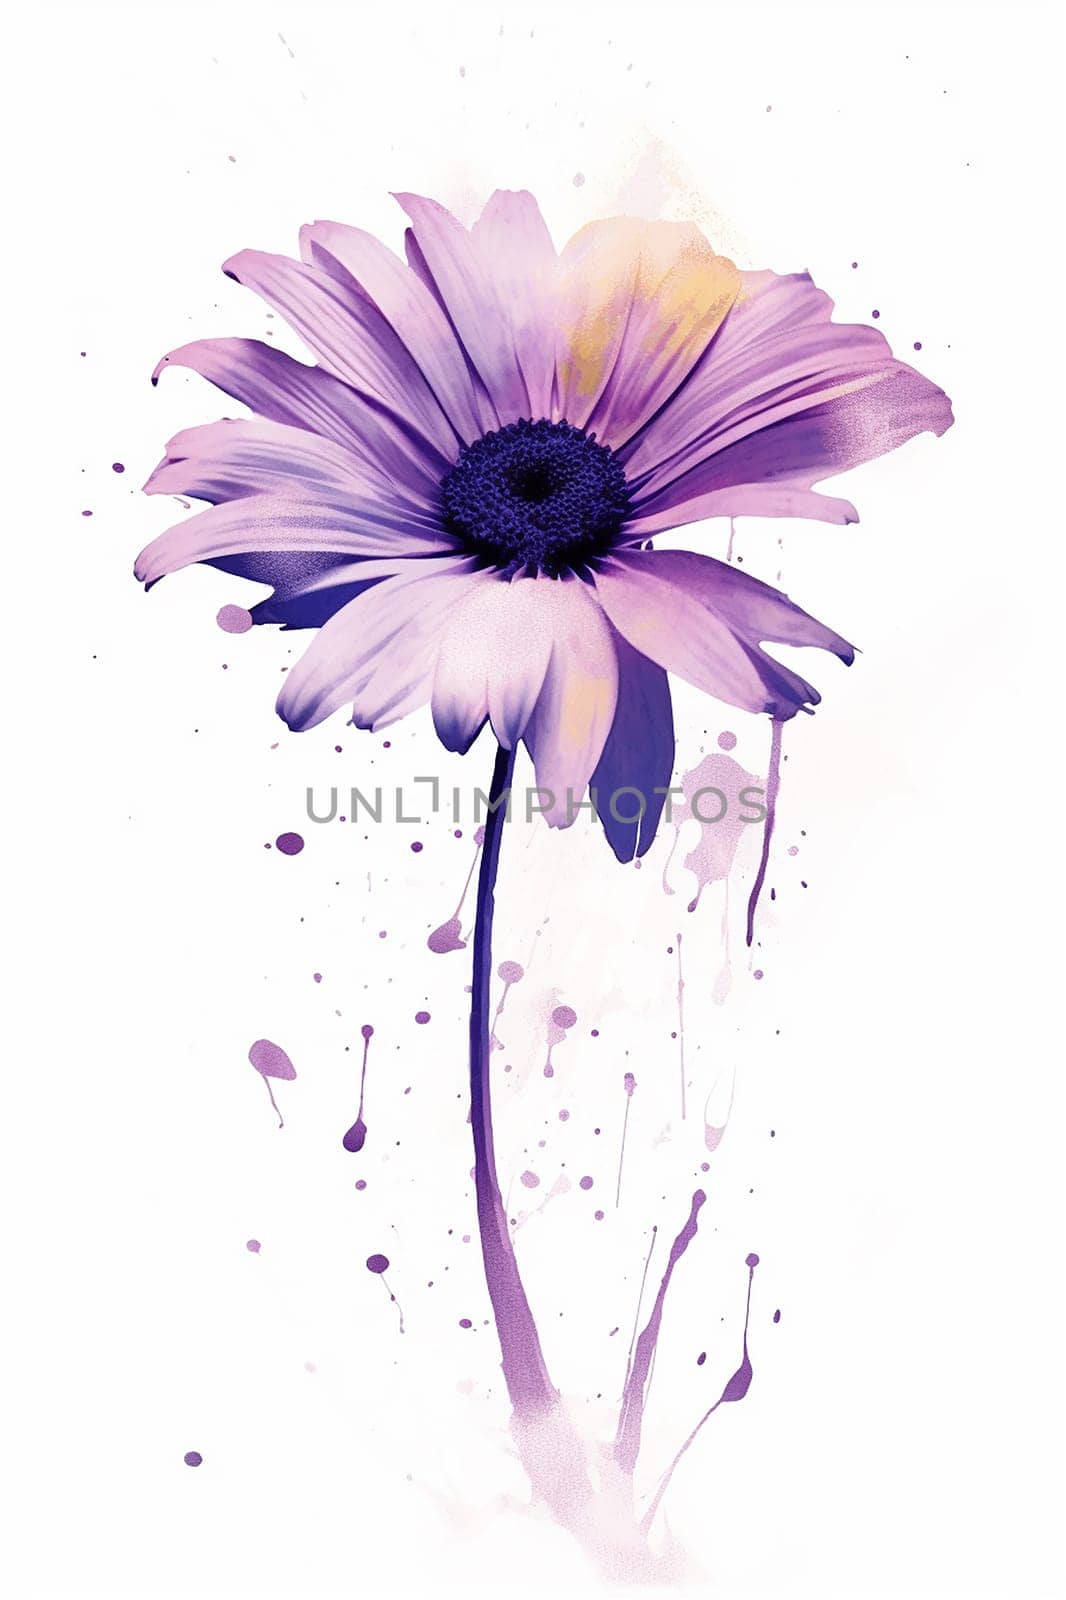 A stylized purple daisy with watercolor splashes. by Hype2art